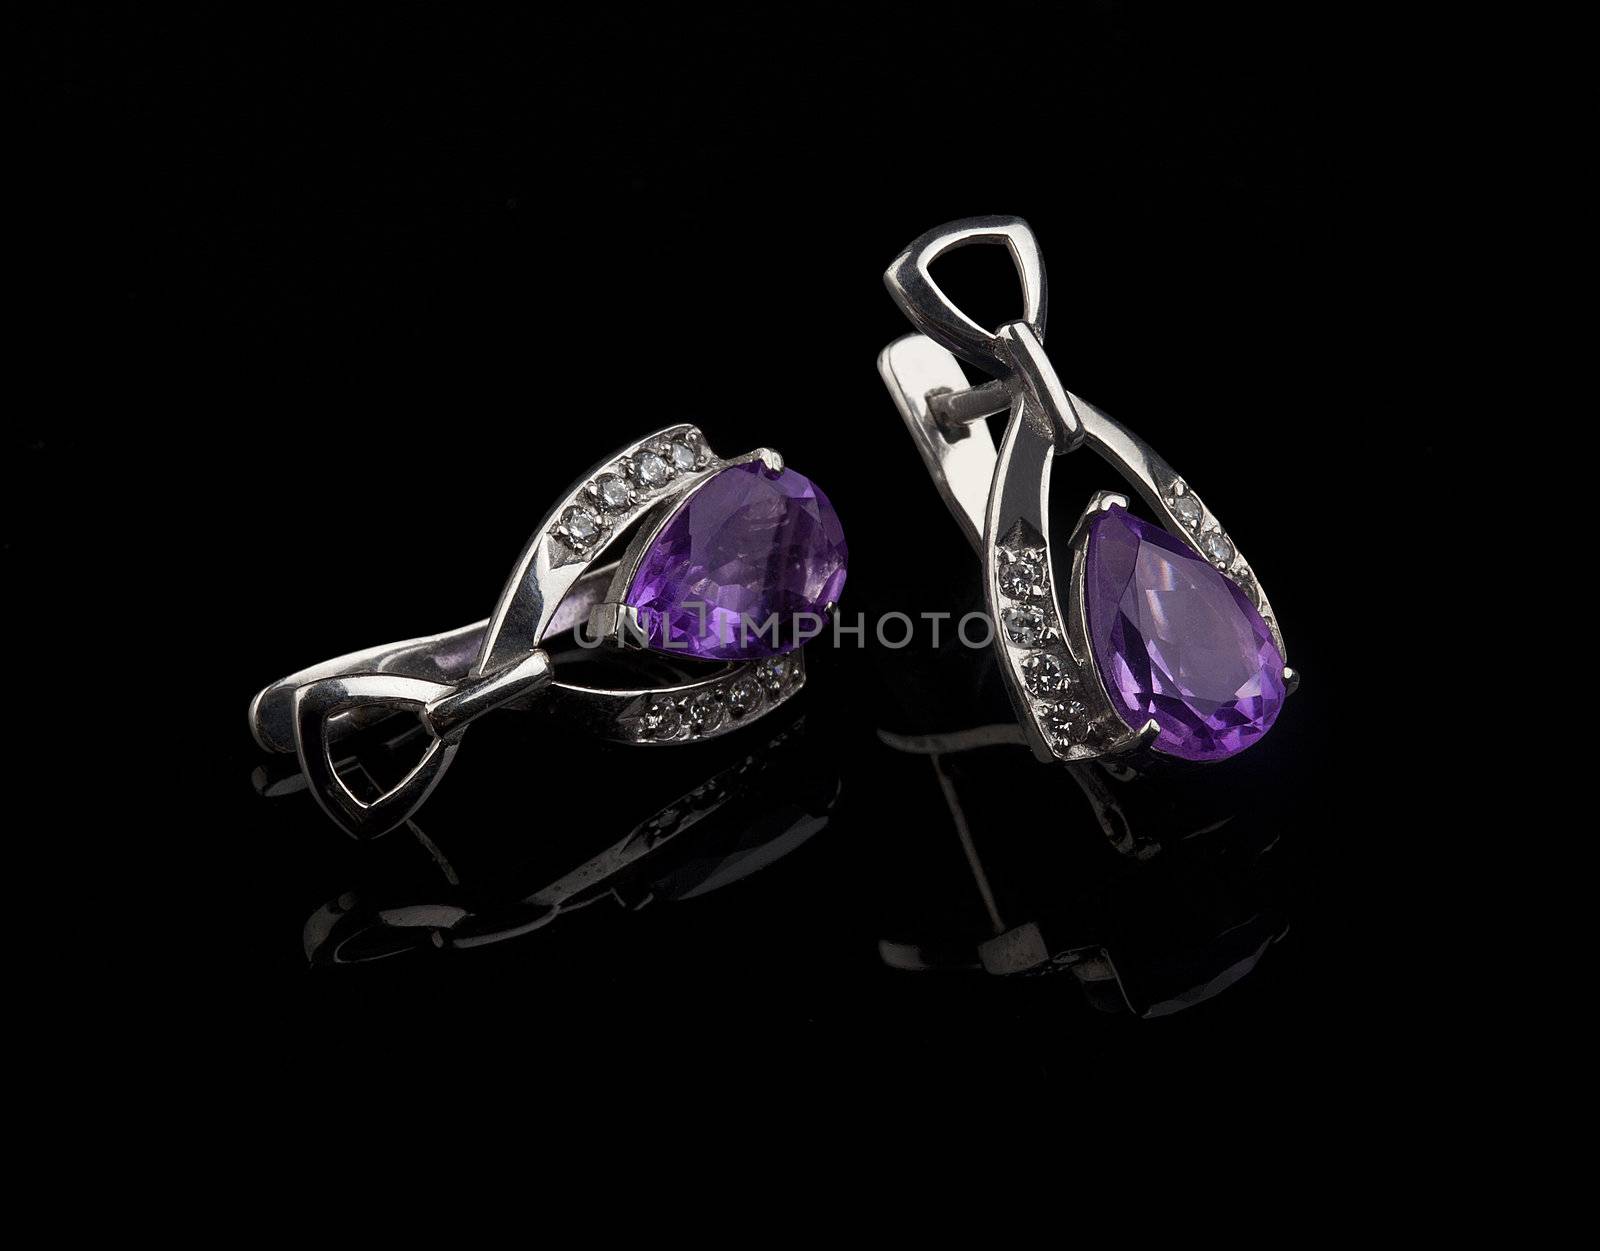 Silver ear-ring with amethyst on the black background